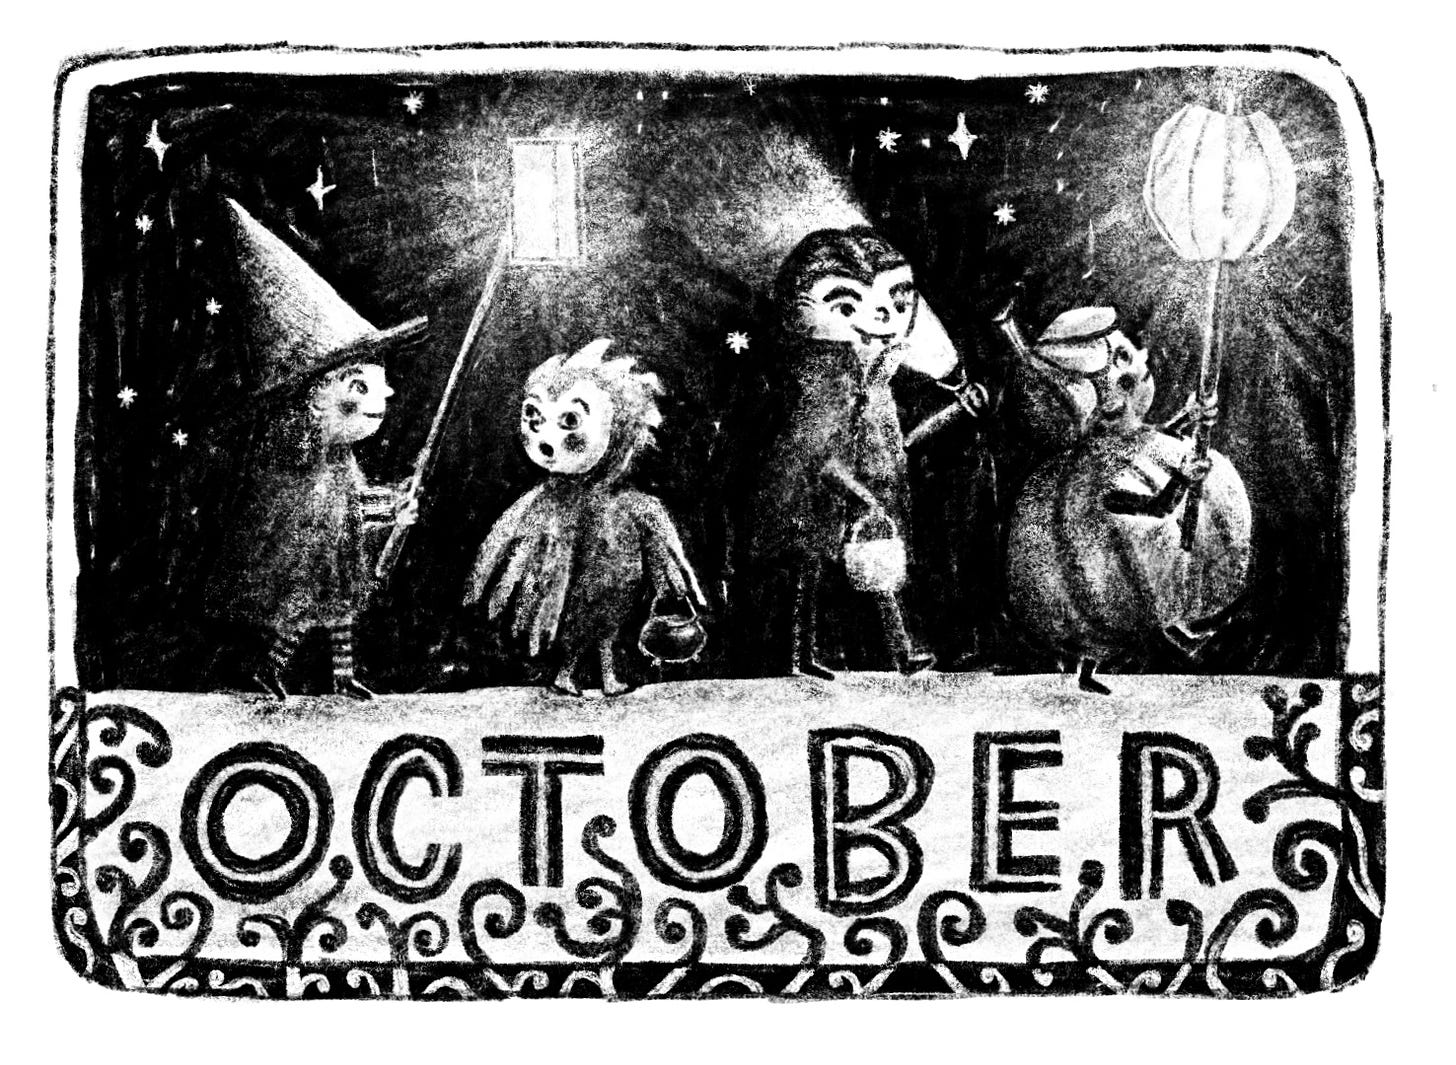 Illustrated banner of 4 children in halloween costumes walking in the dark with lanterns.